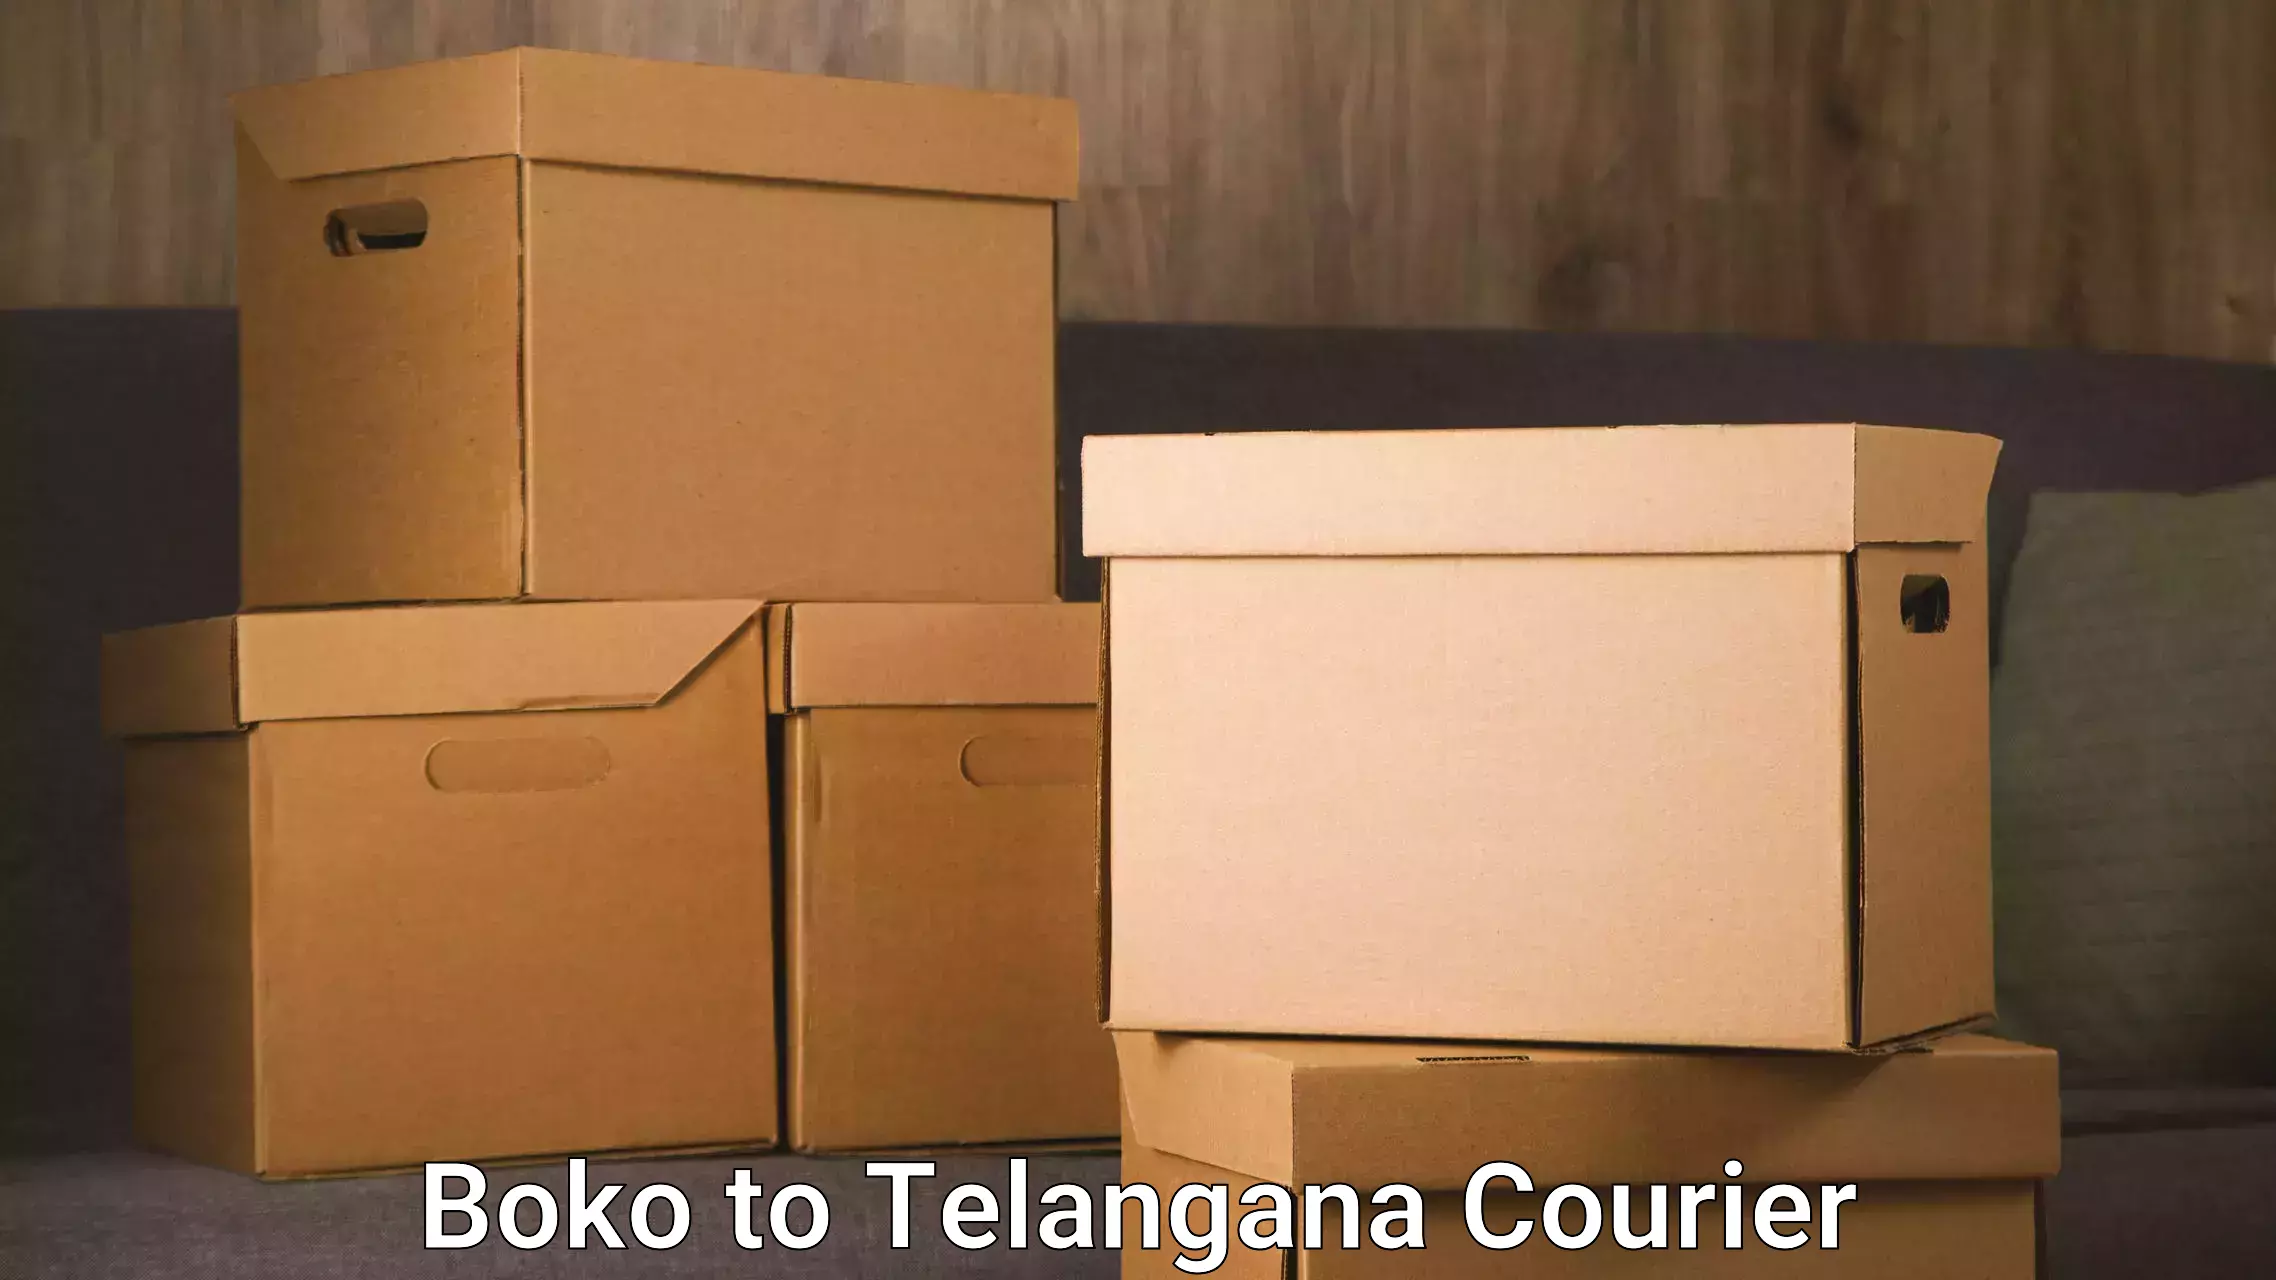 Package delivery network Boko to Telangana